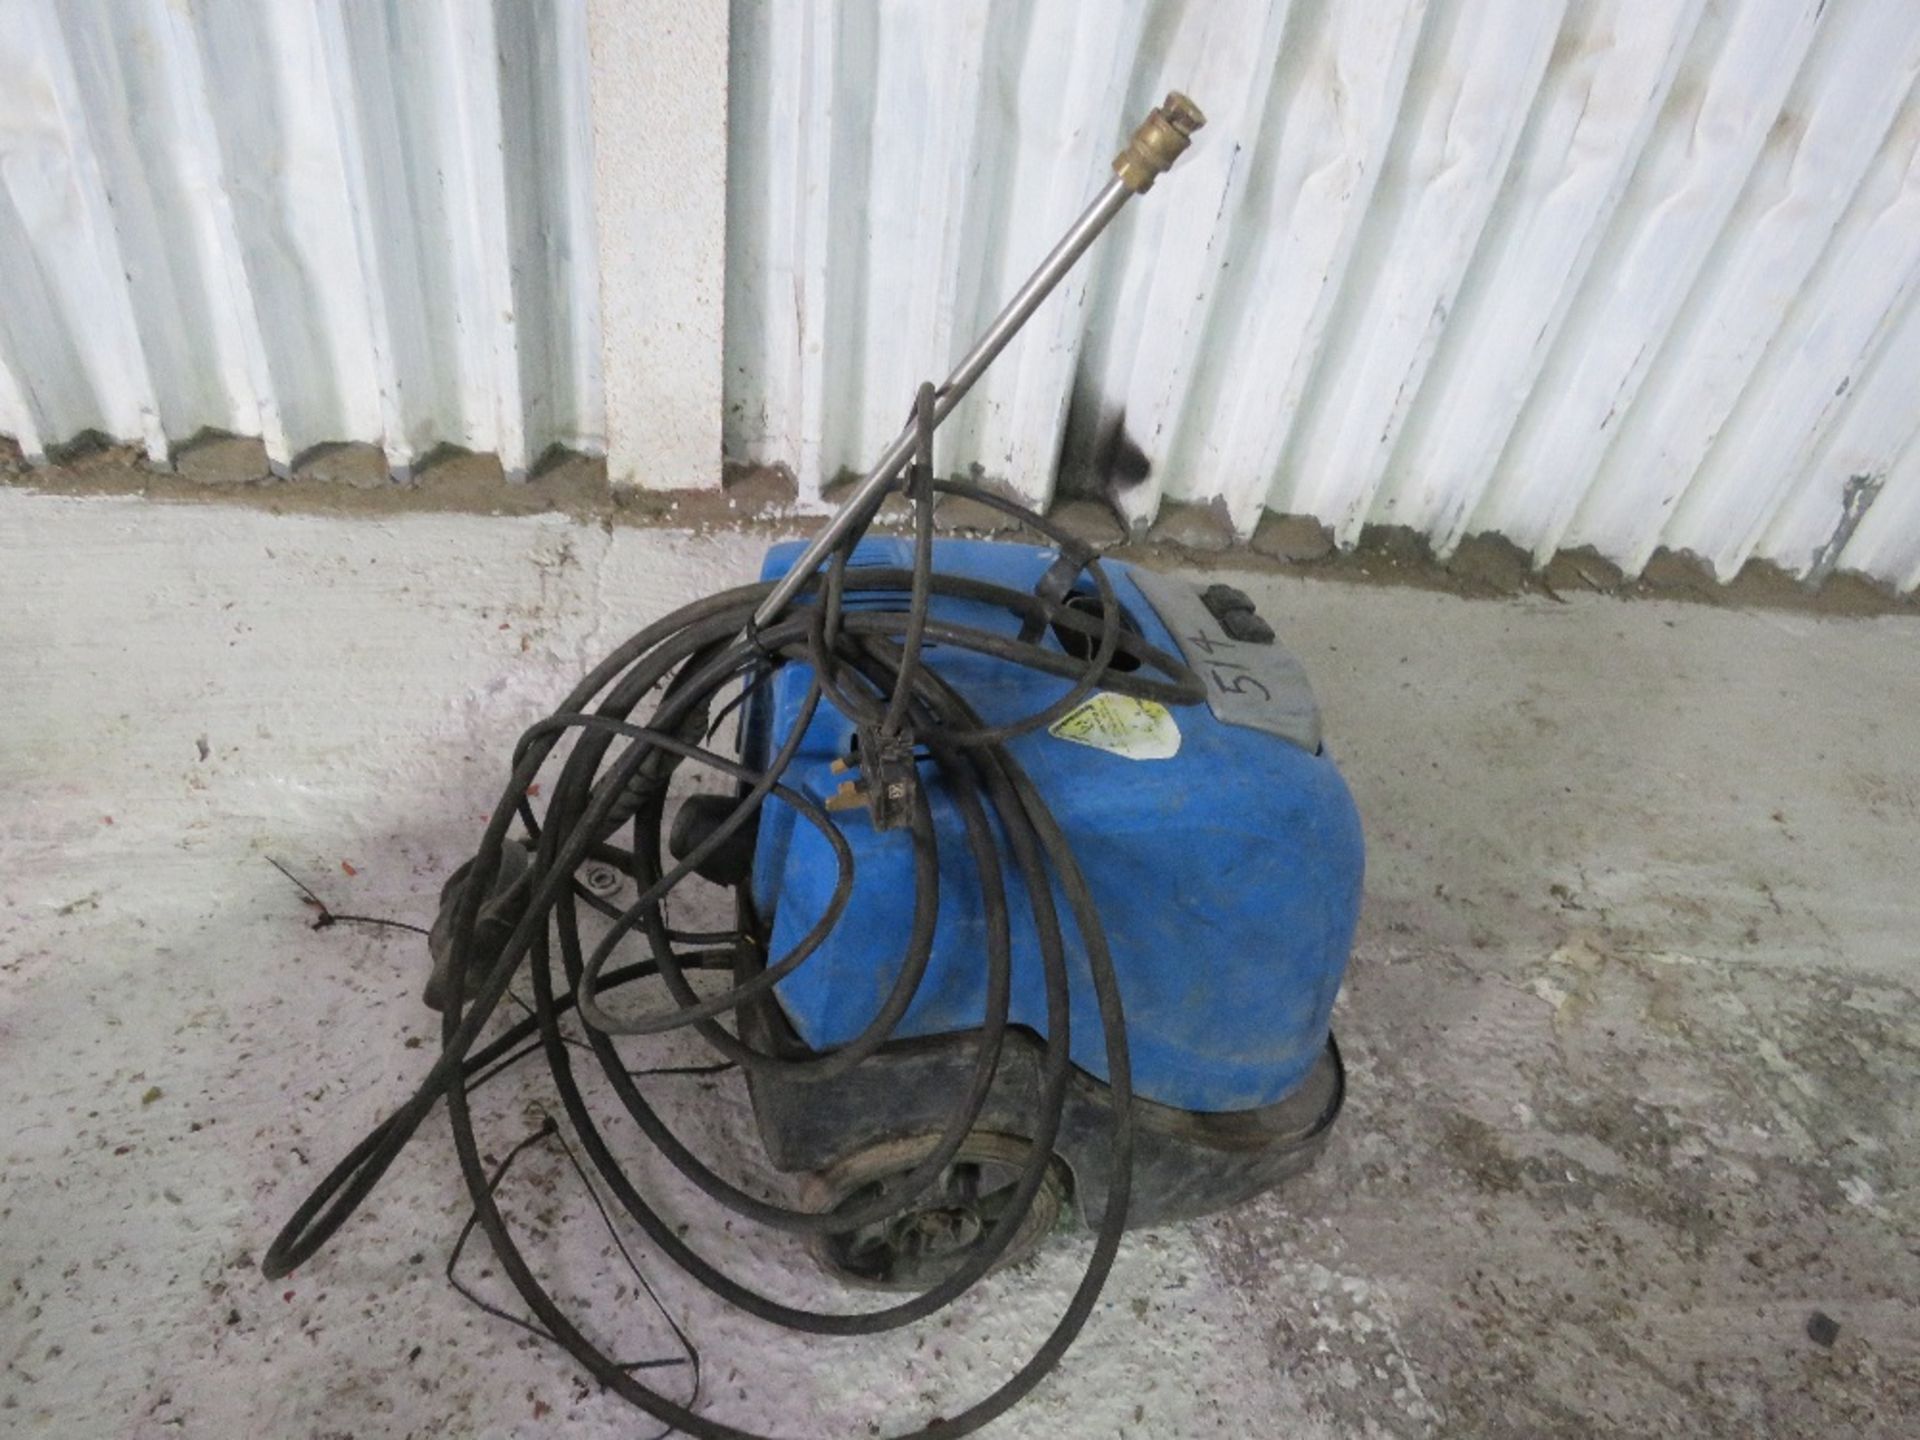 PRESSURE WASHER, 240VOLT POWERED. - Image 3 of 3